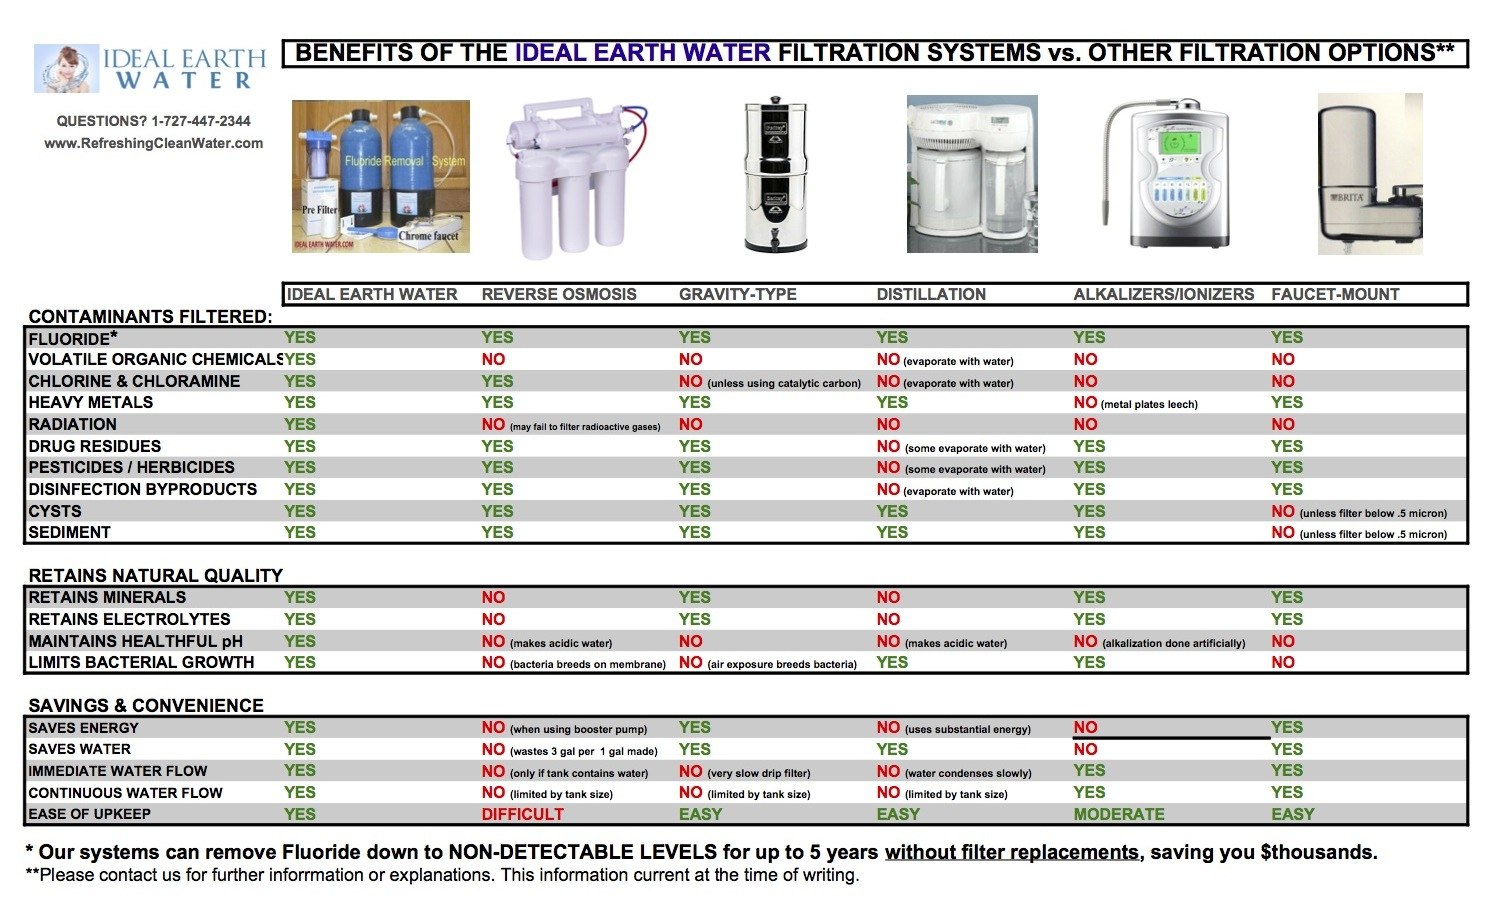 Compare Ideal Earth Water to other Filtration Systems